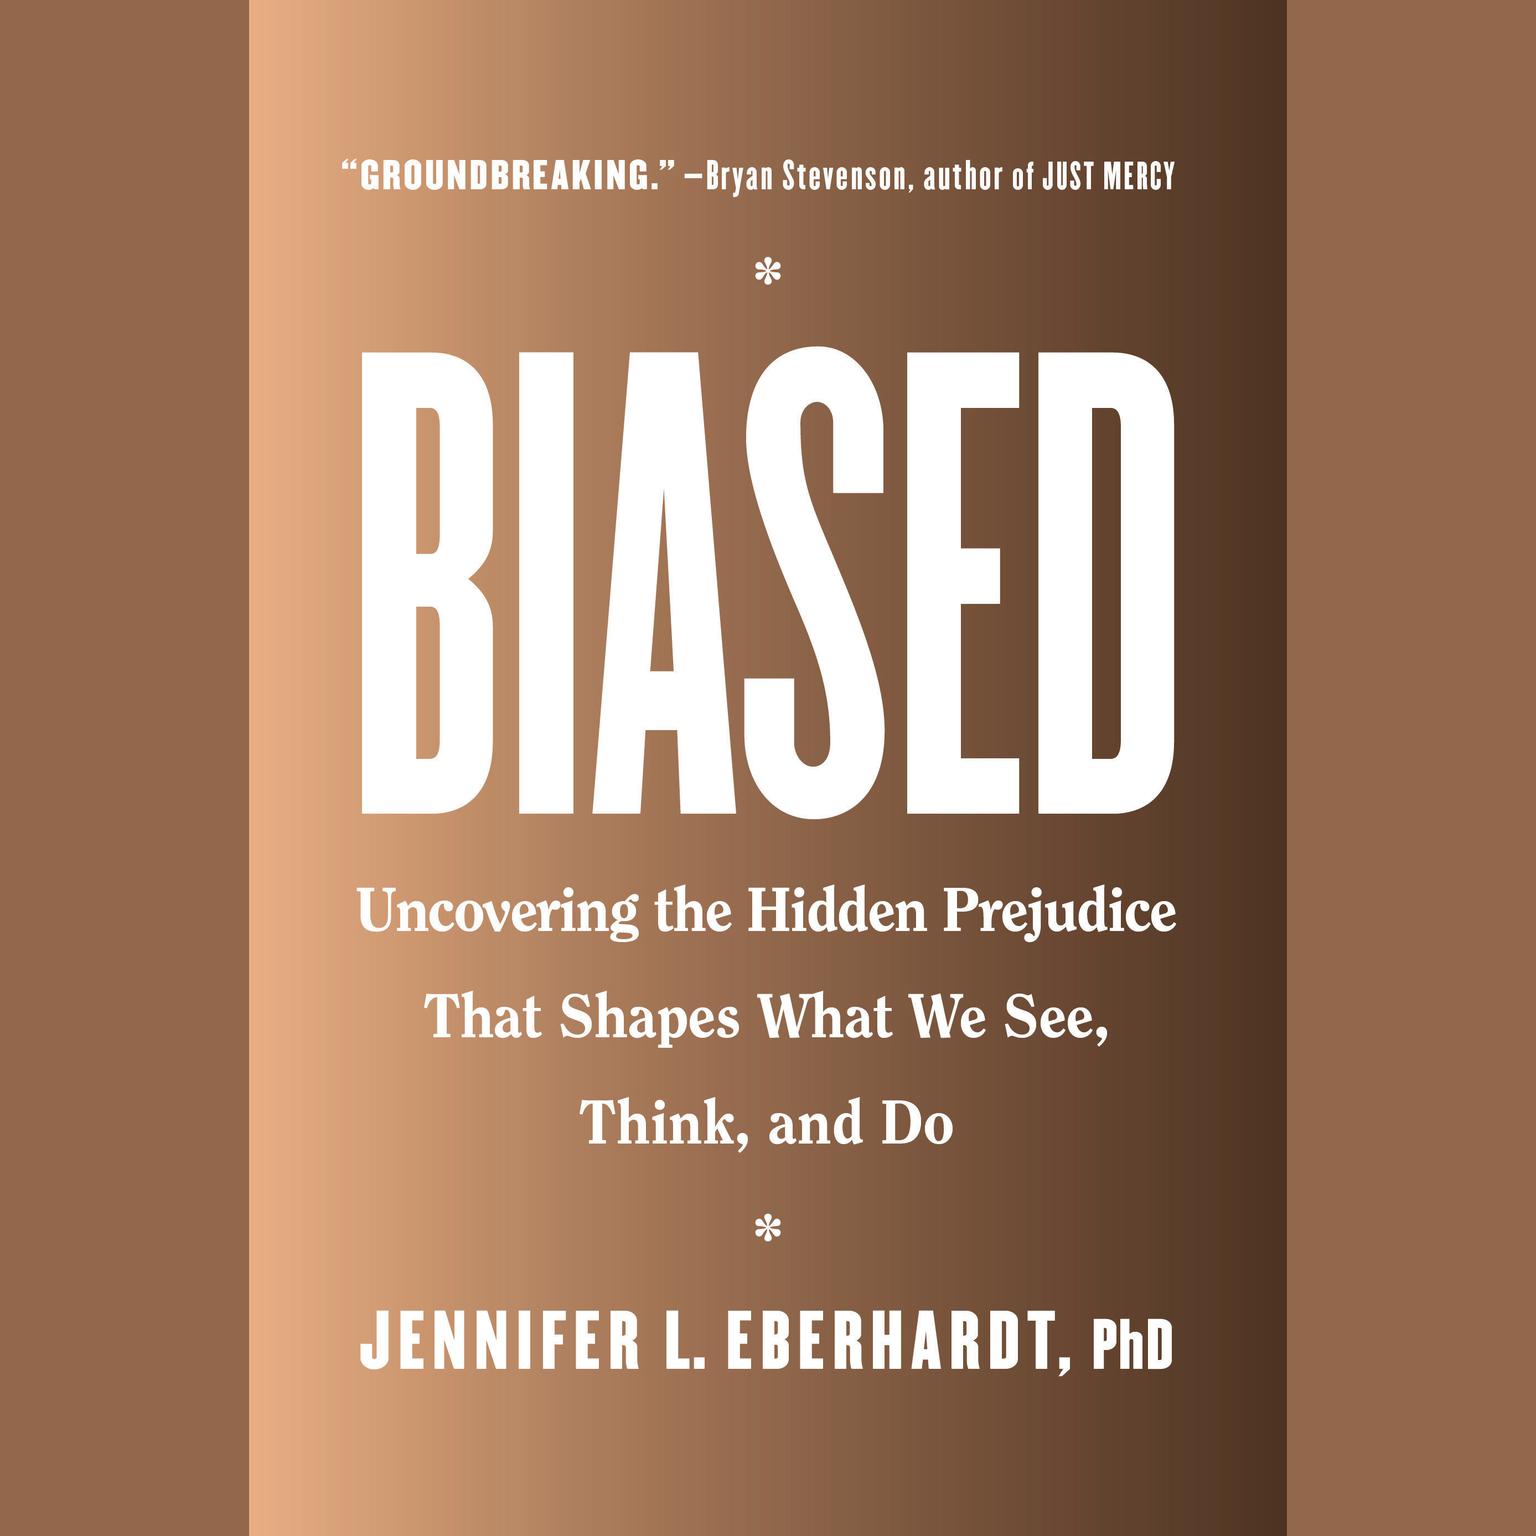 Biased: Uncovering the Hidden Prejudice That Shapes What We See, Think, and Do Audiobook, by Jennifer L. Eberhardt